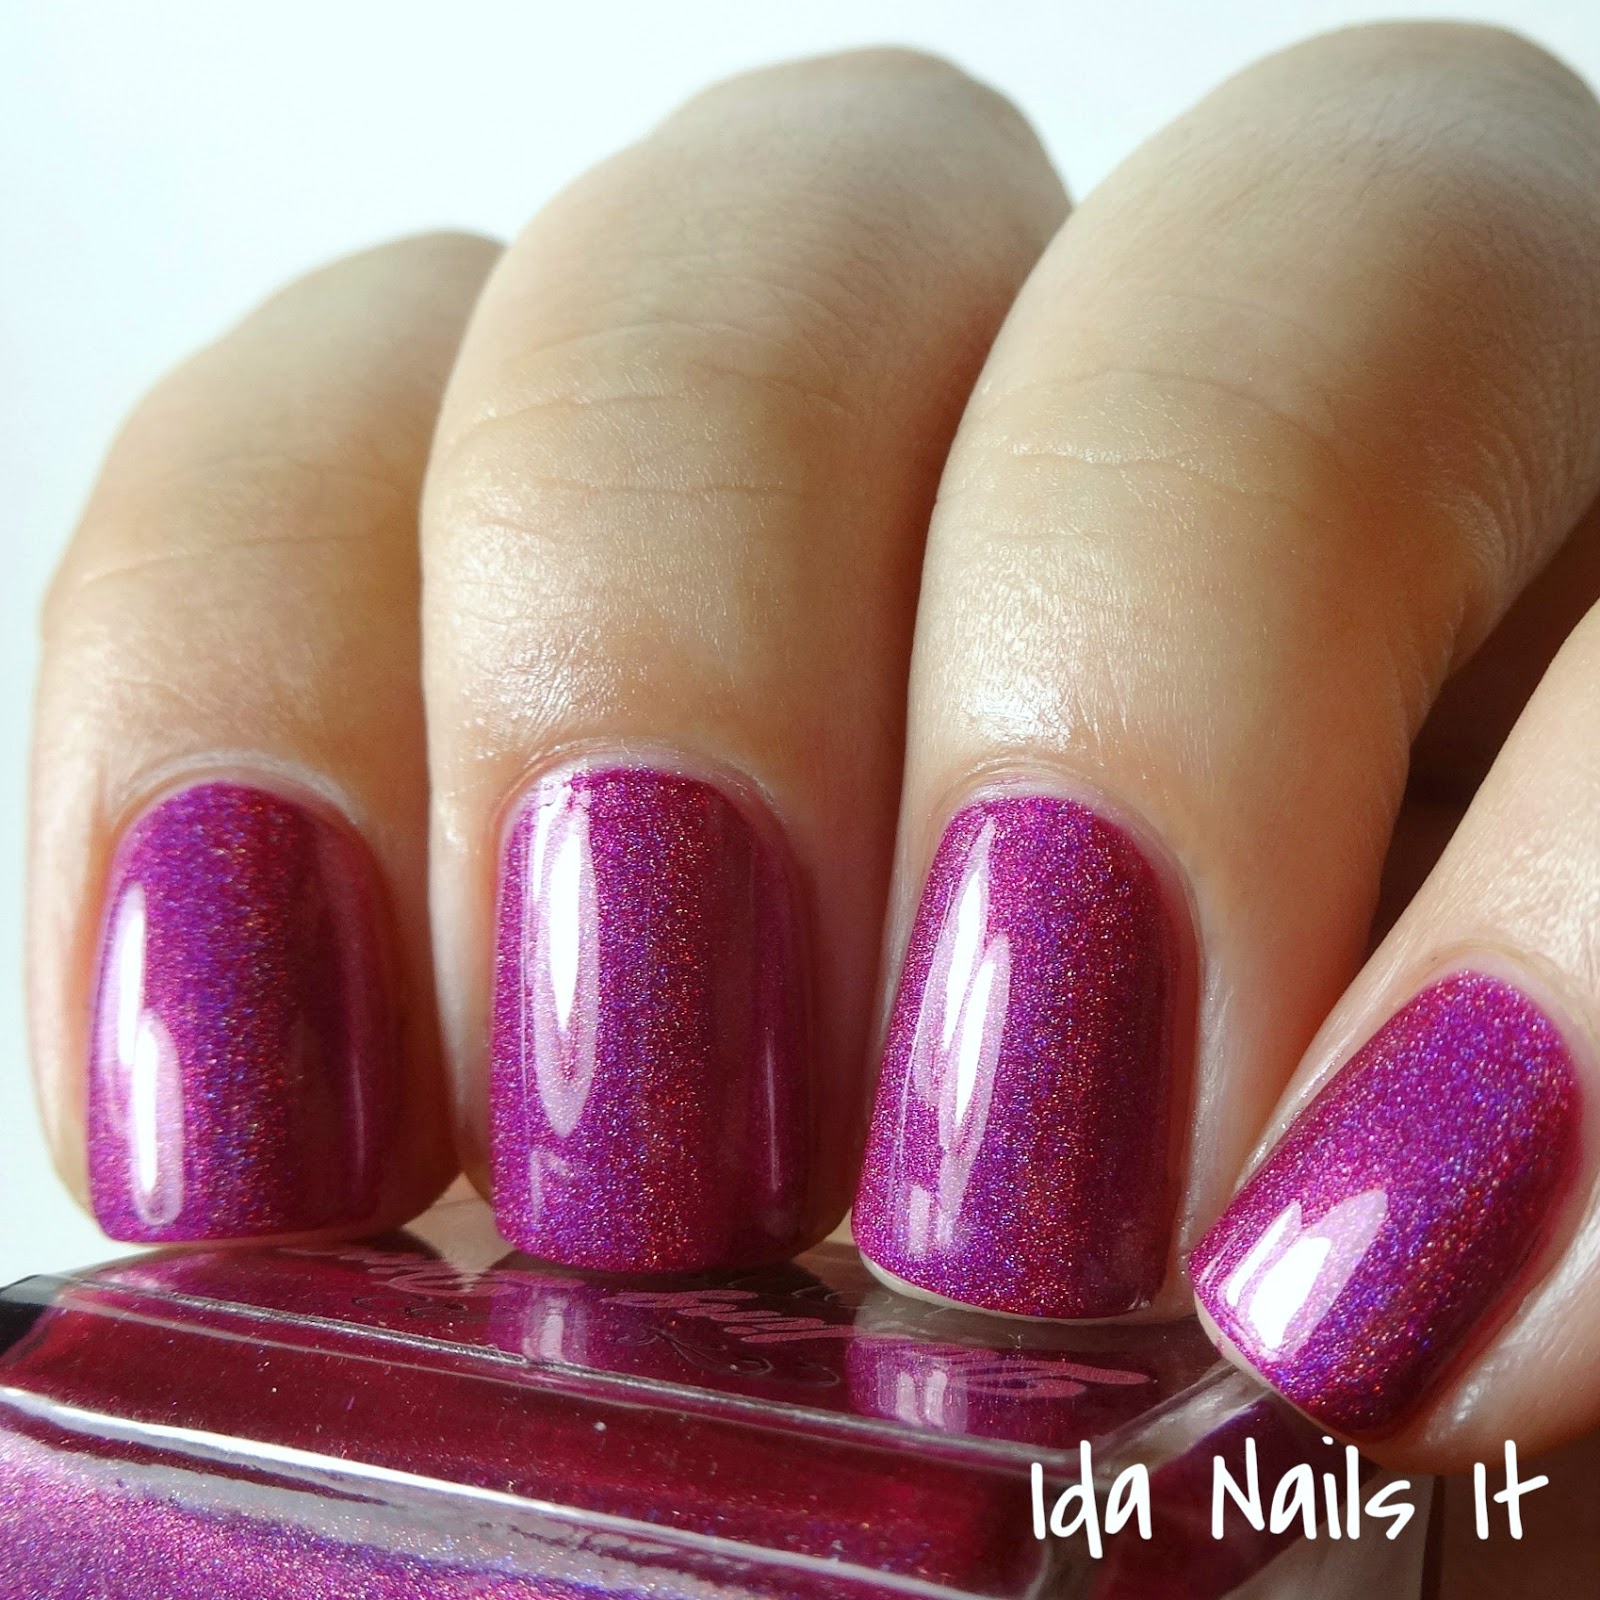 Ida Nails It: Darling Diva Polish Deadpool Collection: Swatches and Review